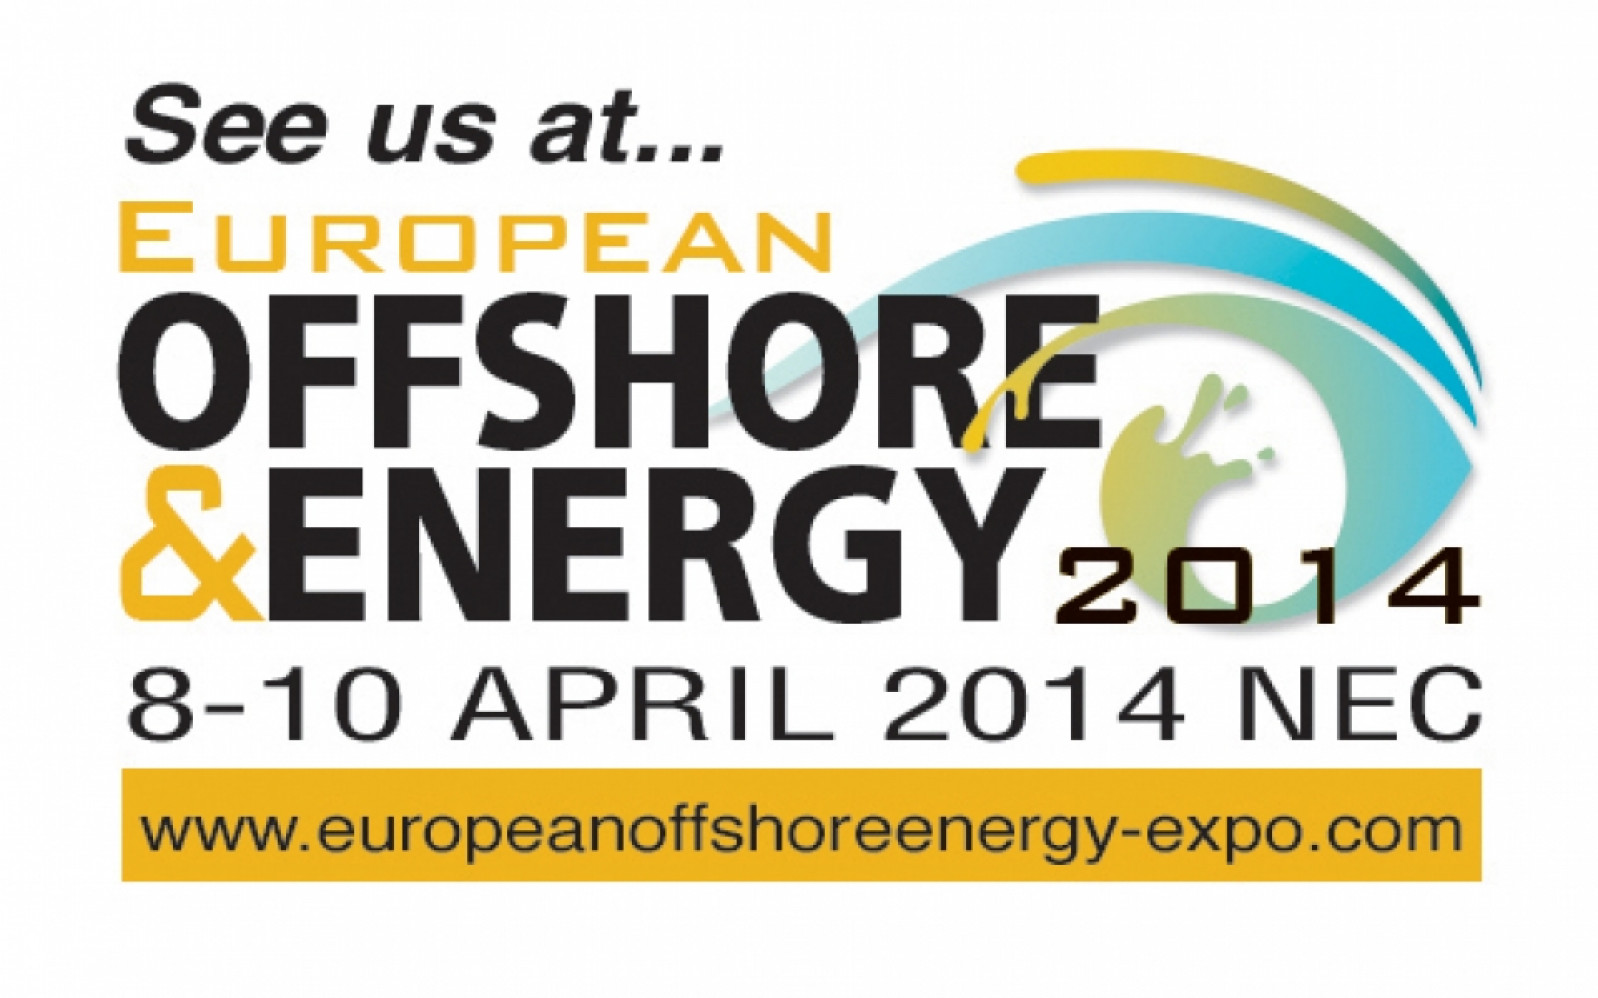 COME SEE US AT EUROPEAN OFFSHORE & ENERGY 2014